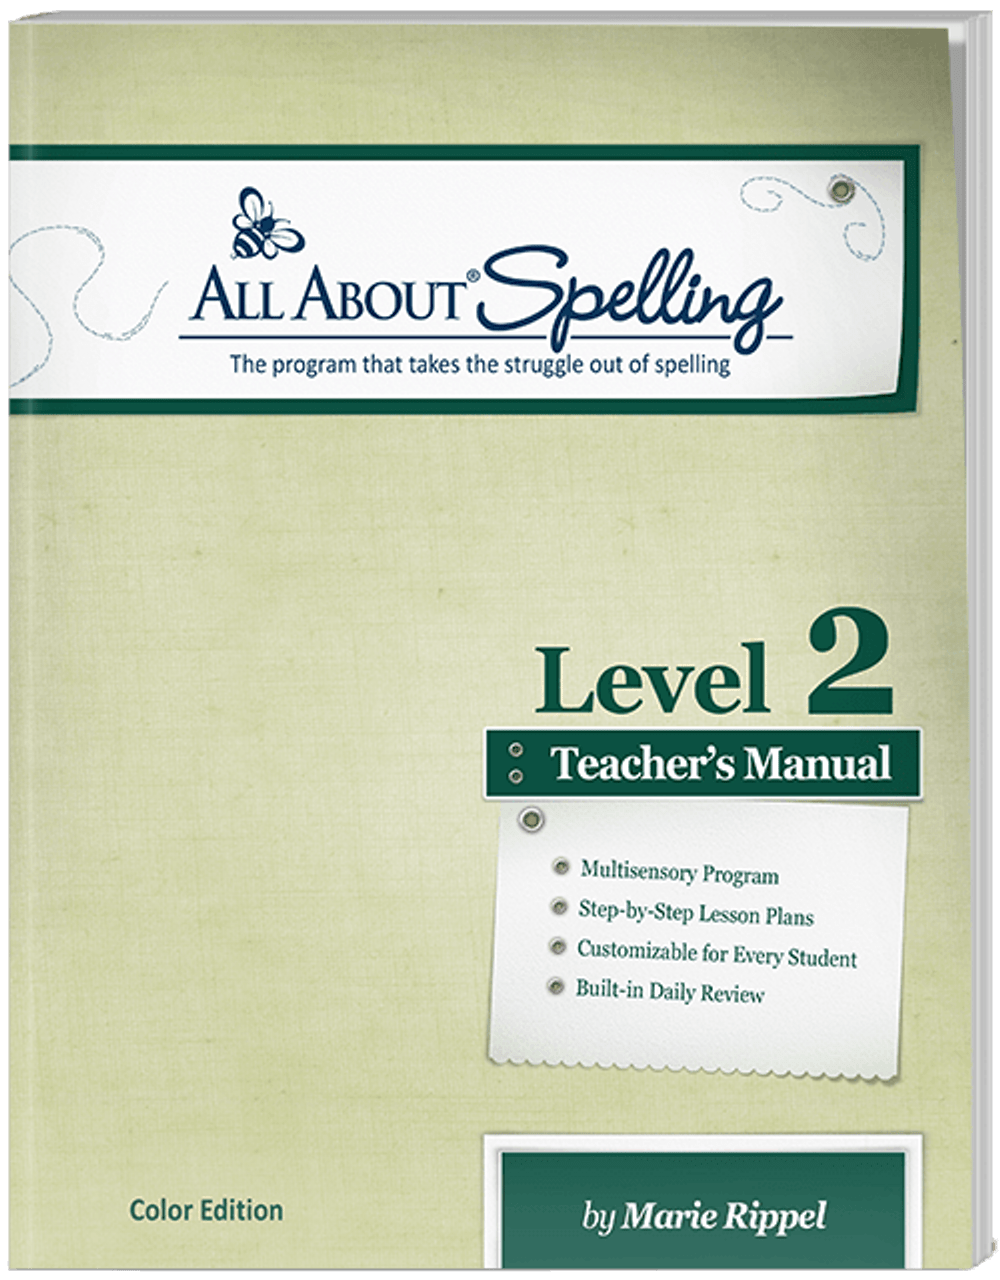 All　About　All　Spelling　Materials　About　Level　Inc.　Learning　Press,